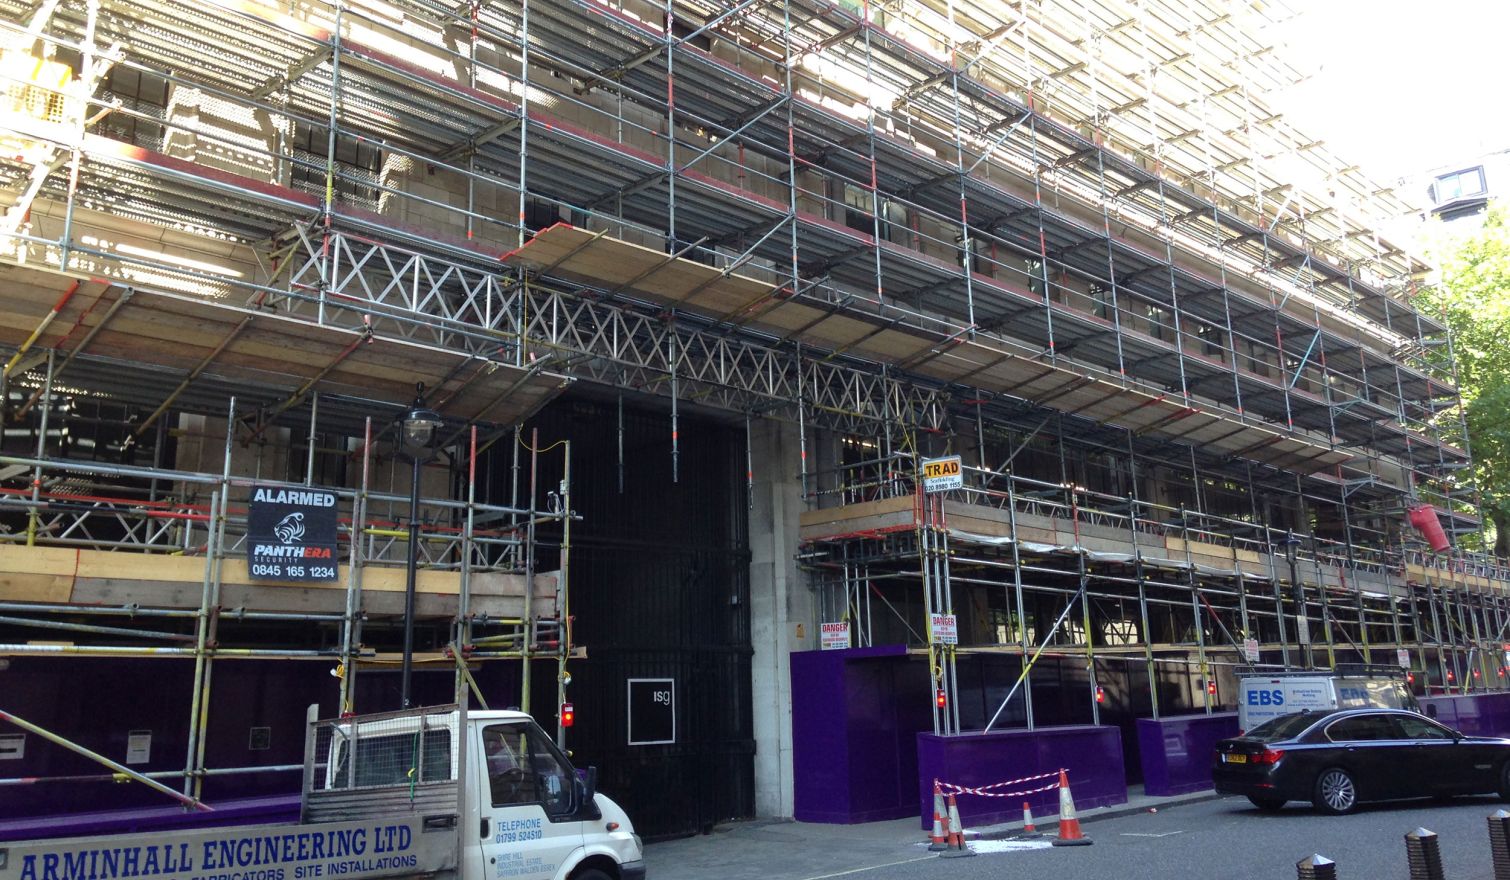 Bush House - Layher Allround Access and Pavement Gantries for Stone Cleaning and Refurbishment